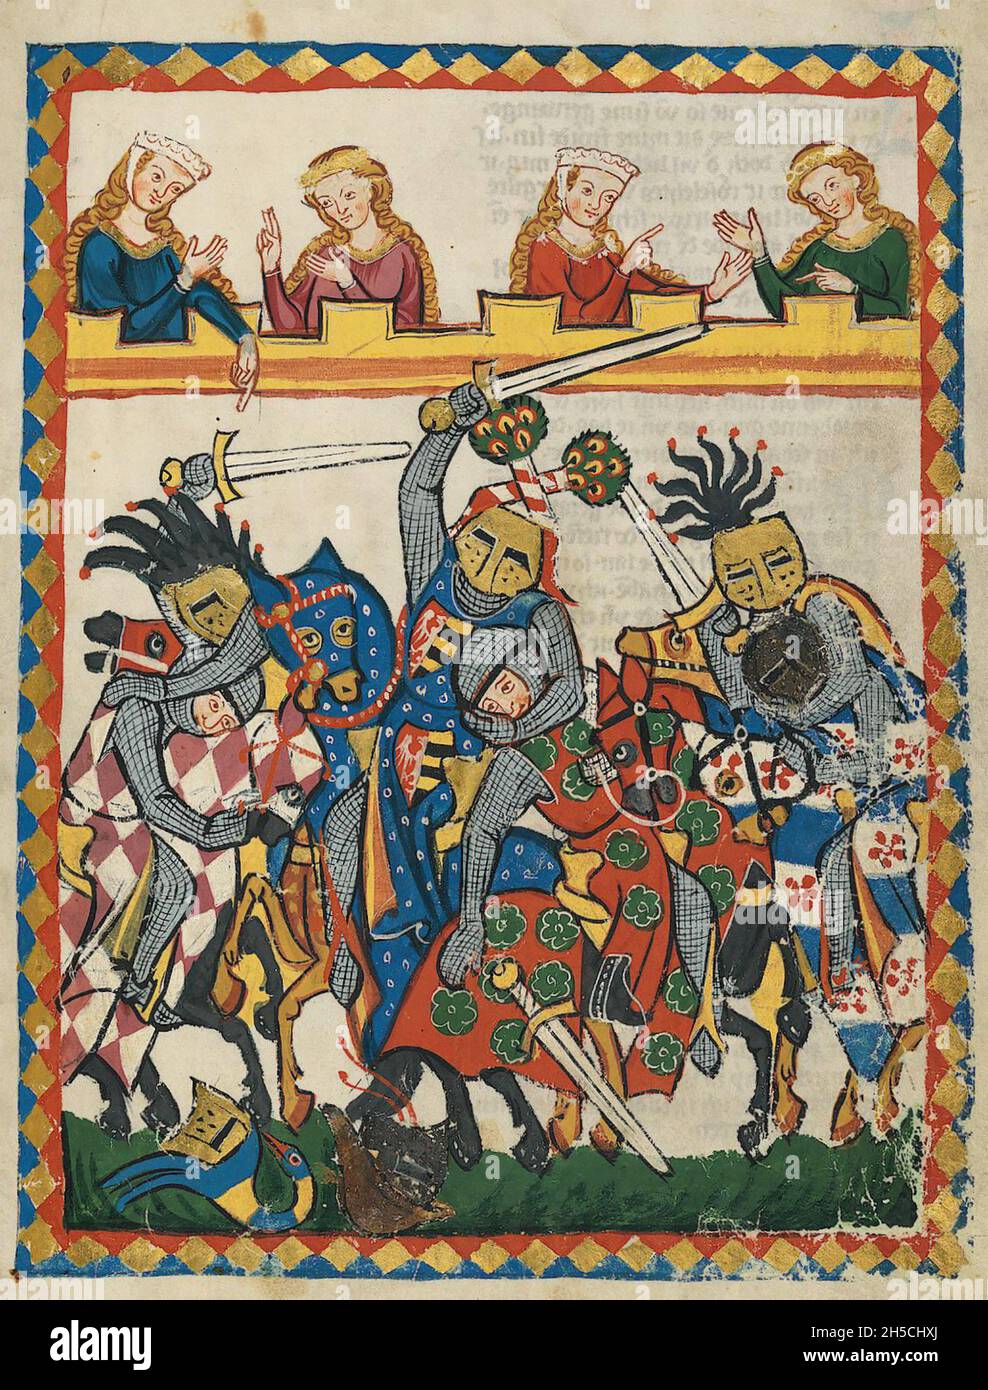 CODEX MANESSE An early to middle 14th century German manuscript containing songs and illustrating medieval life. Court ladies watch a mock battle. Stock Photo